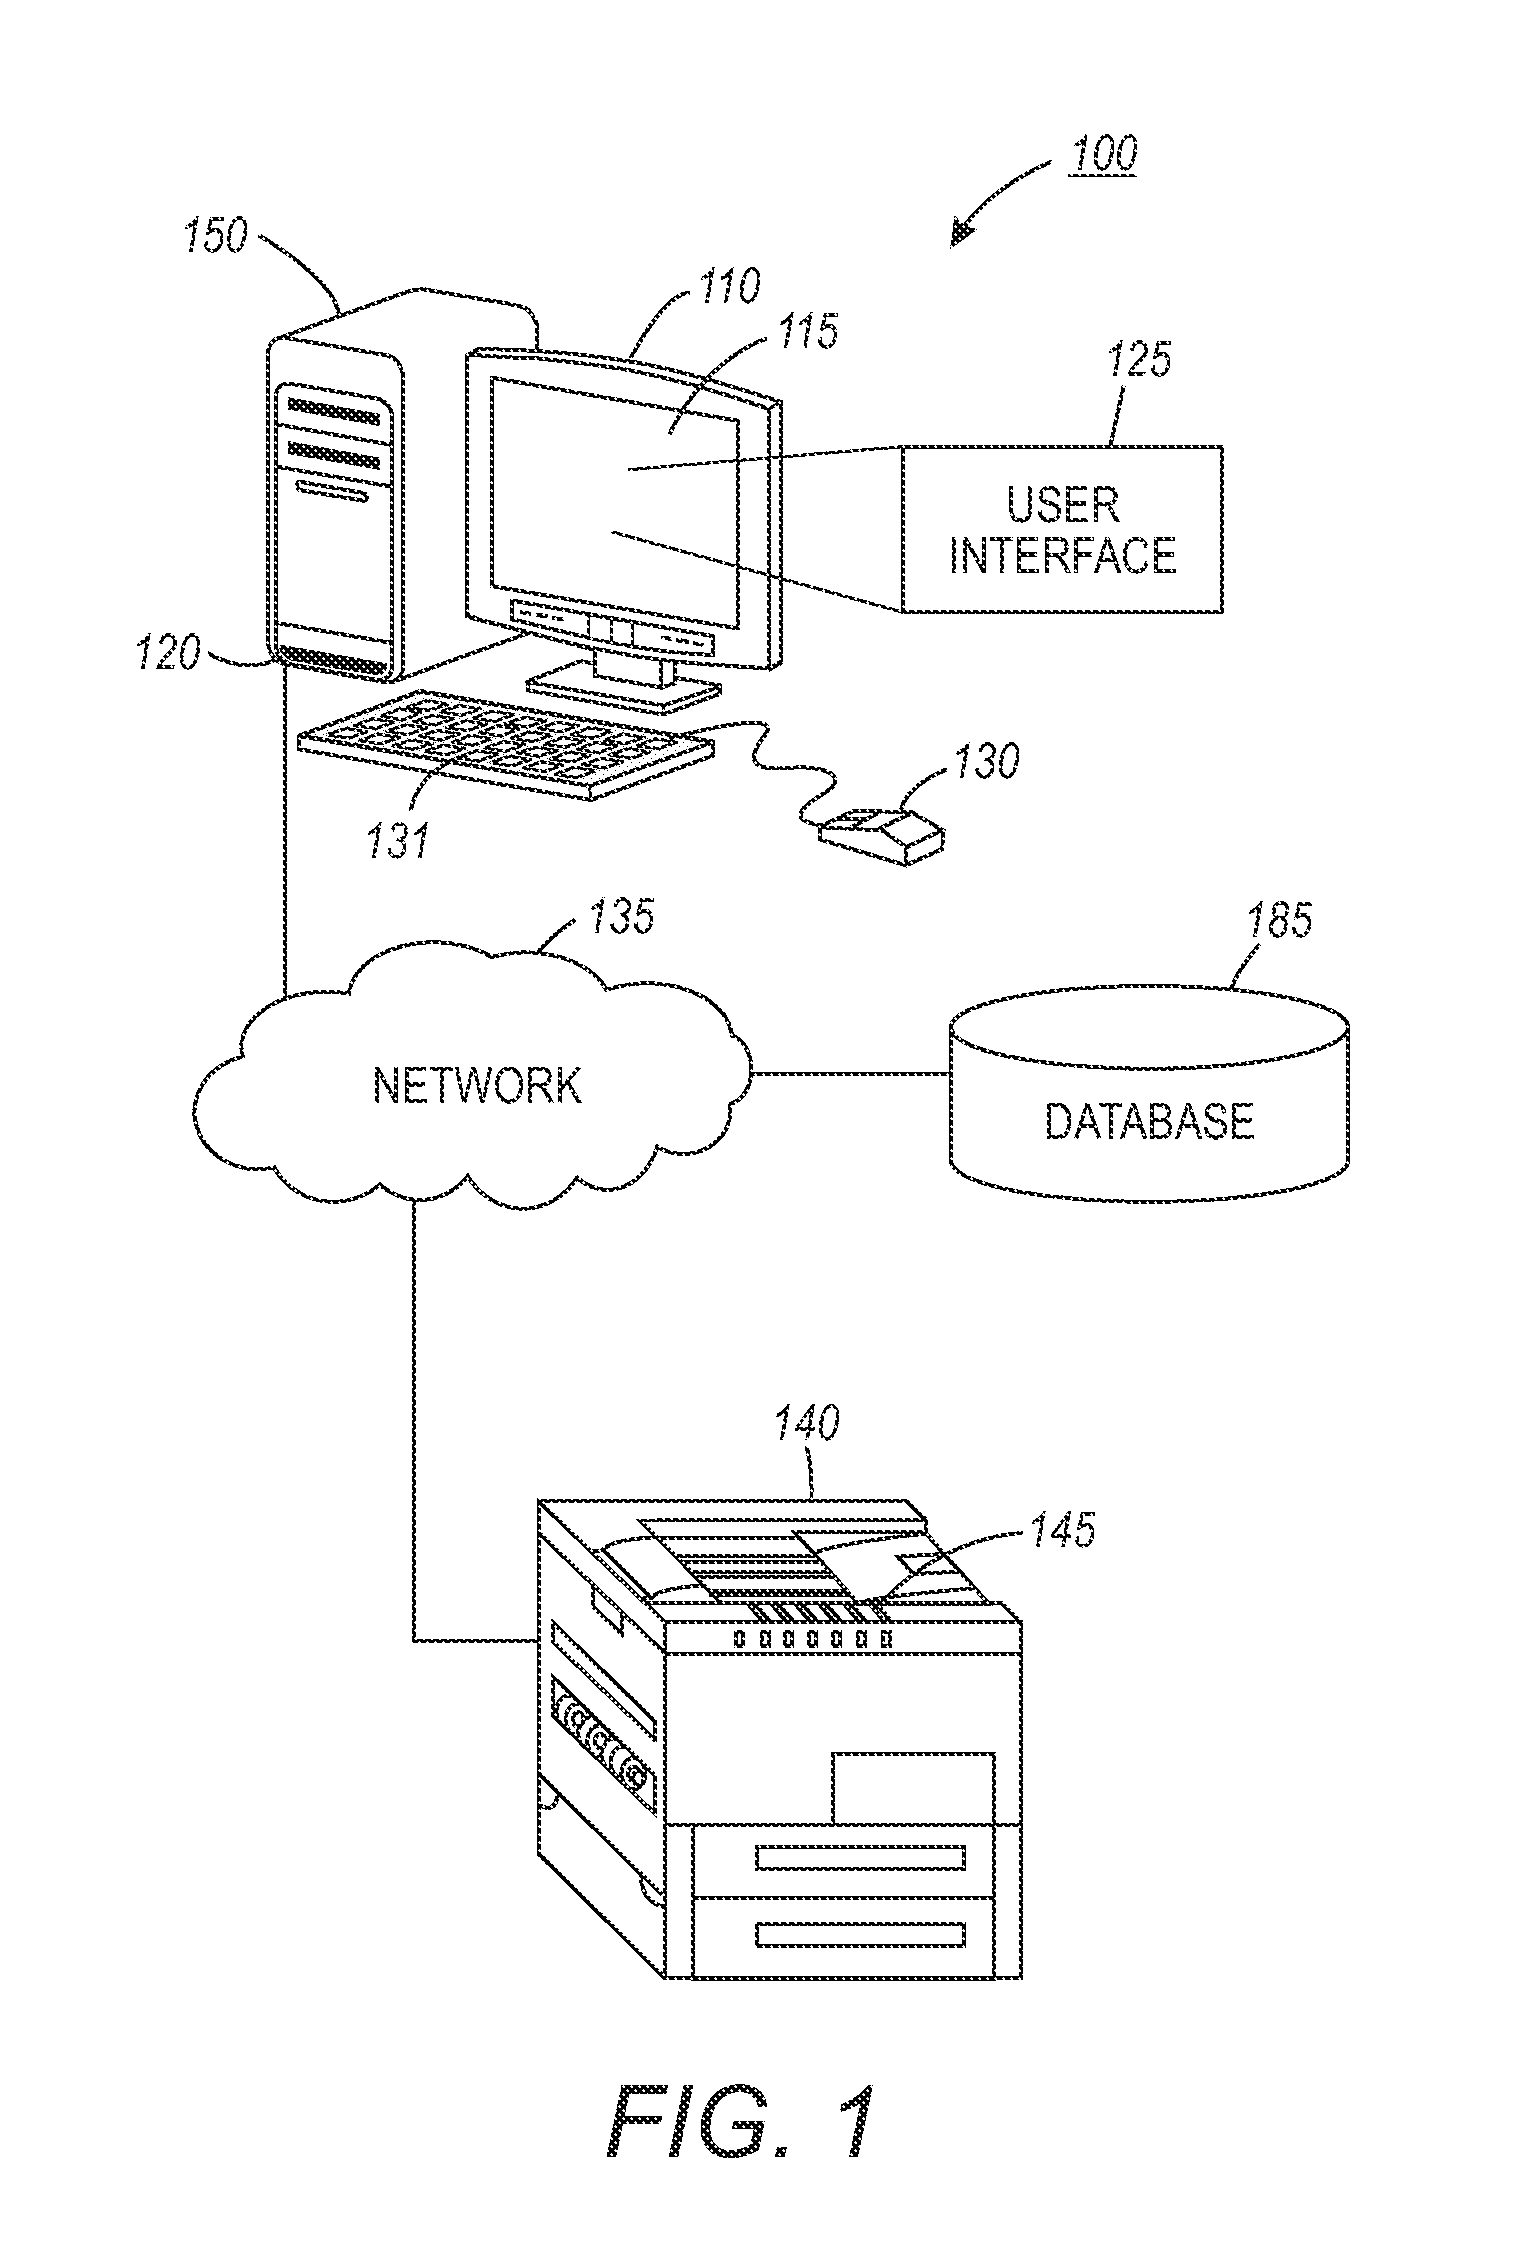 Method and system for estimating variable data document conversion time